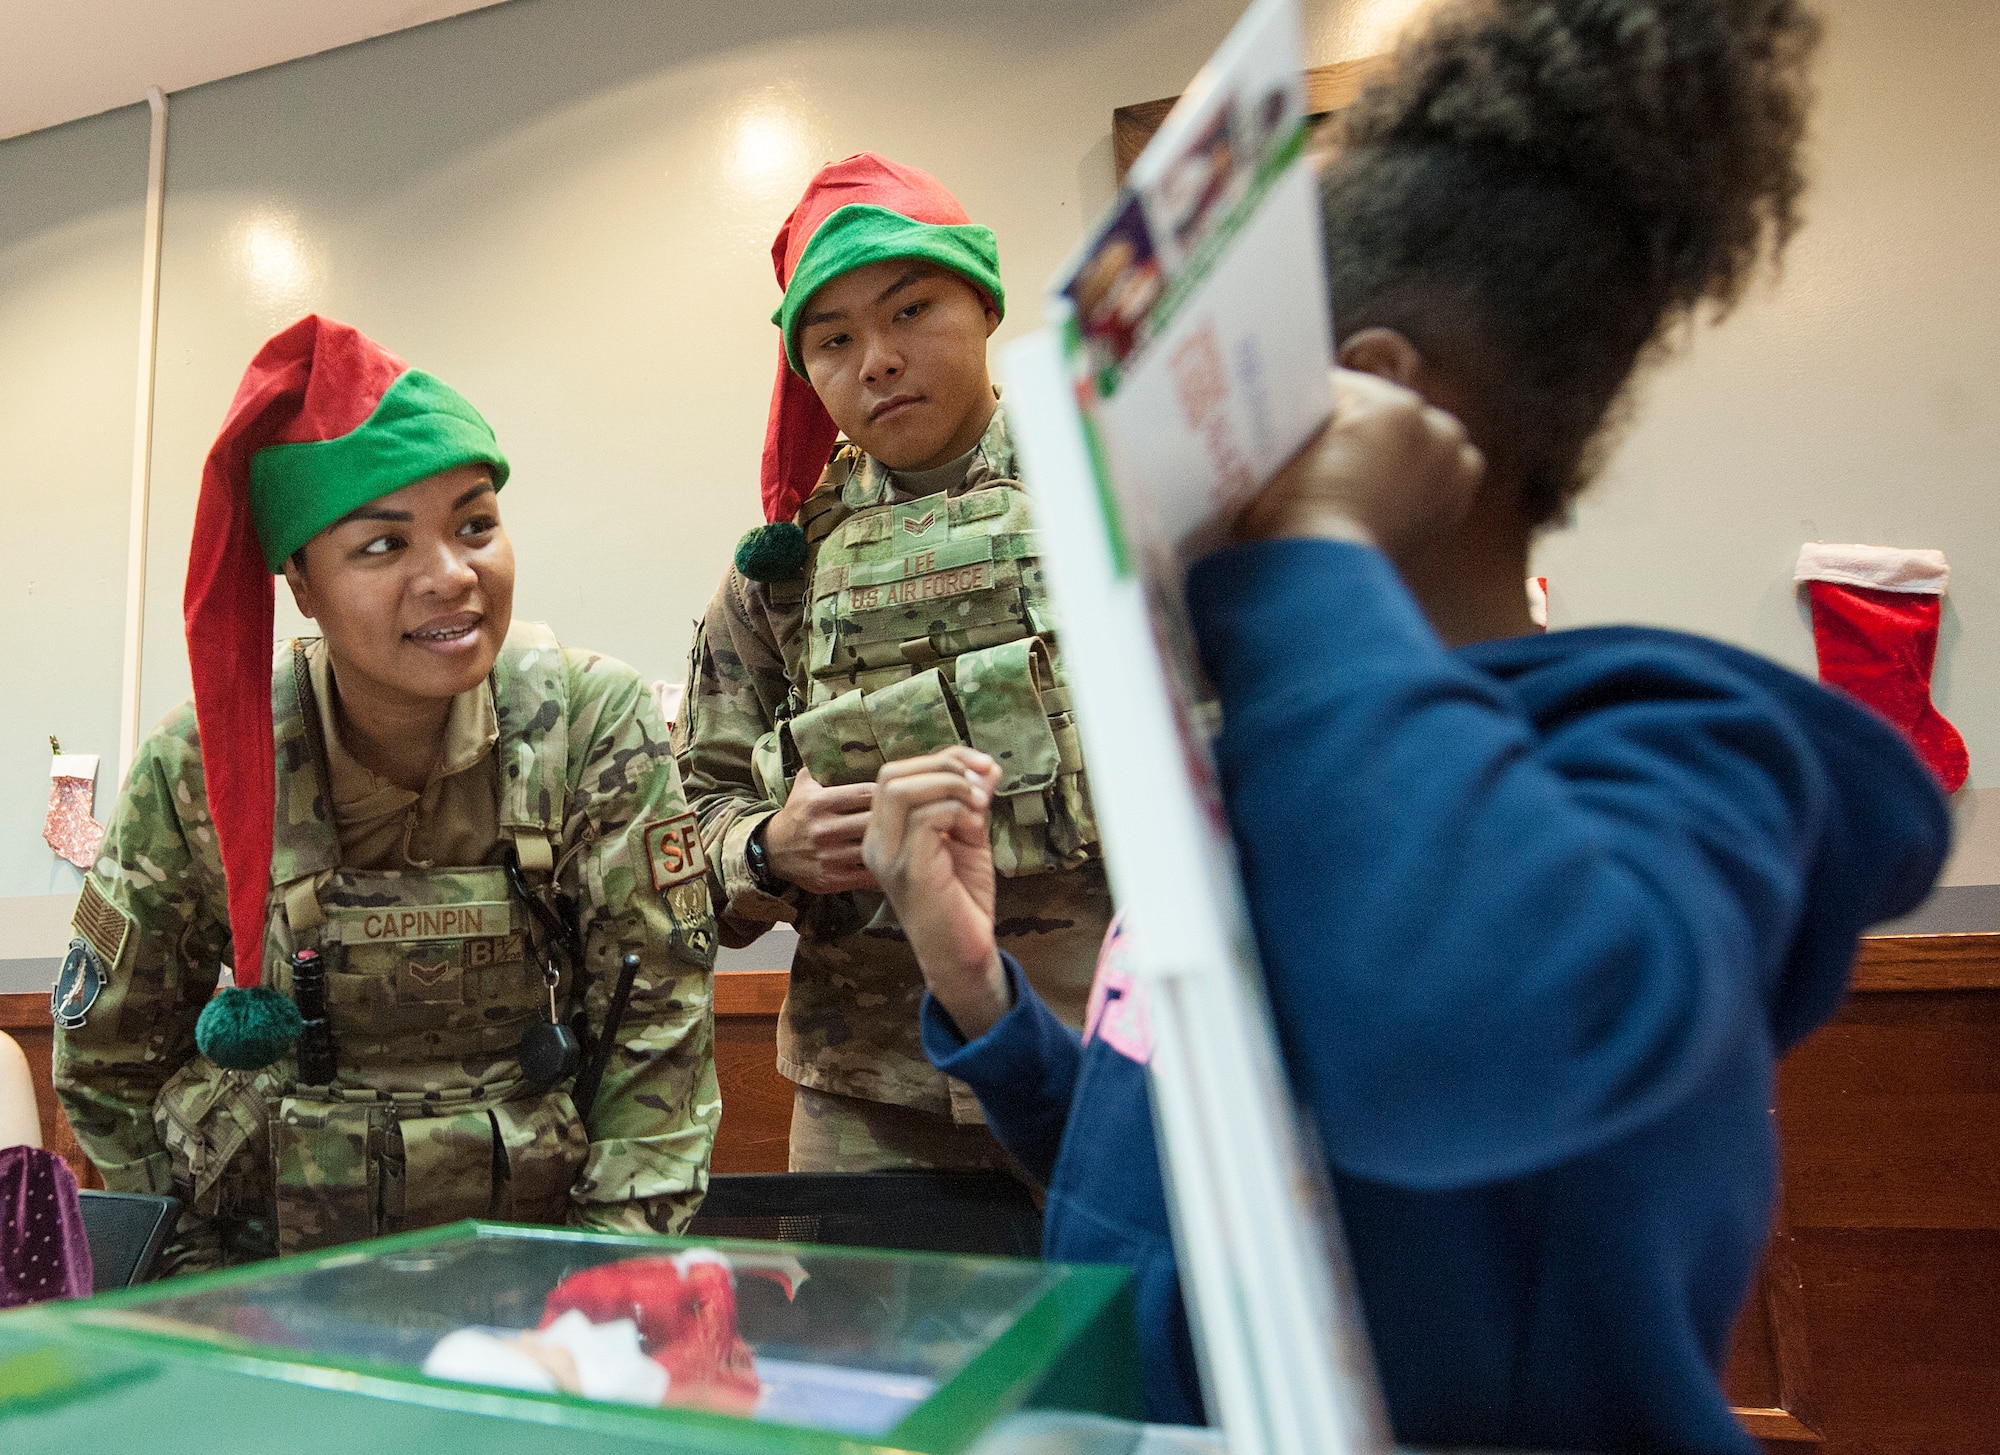 Airman 1st Class Jeannelyn Capinpin, left, and Senior Airman Bronson Lee, both of the 379th Expeditionary Security Forces Squadron, talk to a military child during a holiday kick-off event Dec. 1, 2018, at Al Udeid Air Base, Qatar. Service members and their families were able to play holiday games, watch live music performances, interact with Santa Claus and watch a tree lighting ceremony, during the event. (U.S. Air Force photo by Tech. Sgt. Christopher Hubenthal)